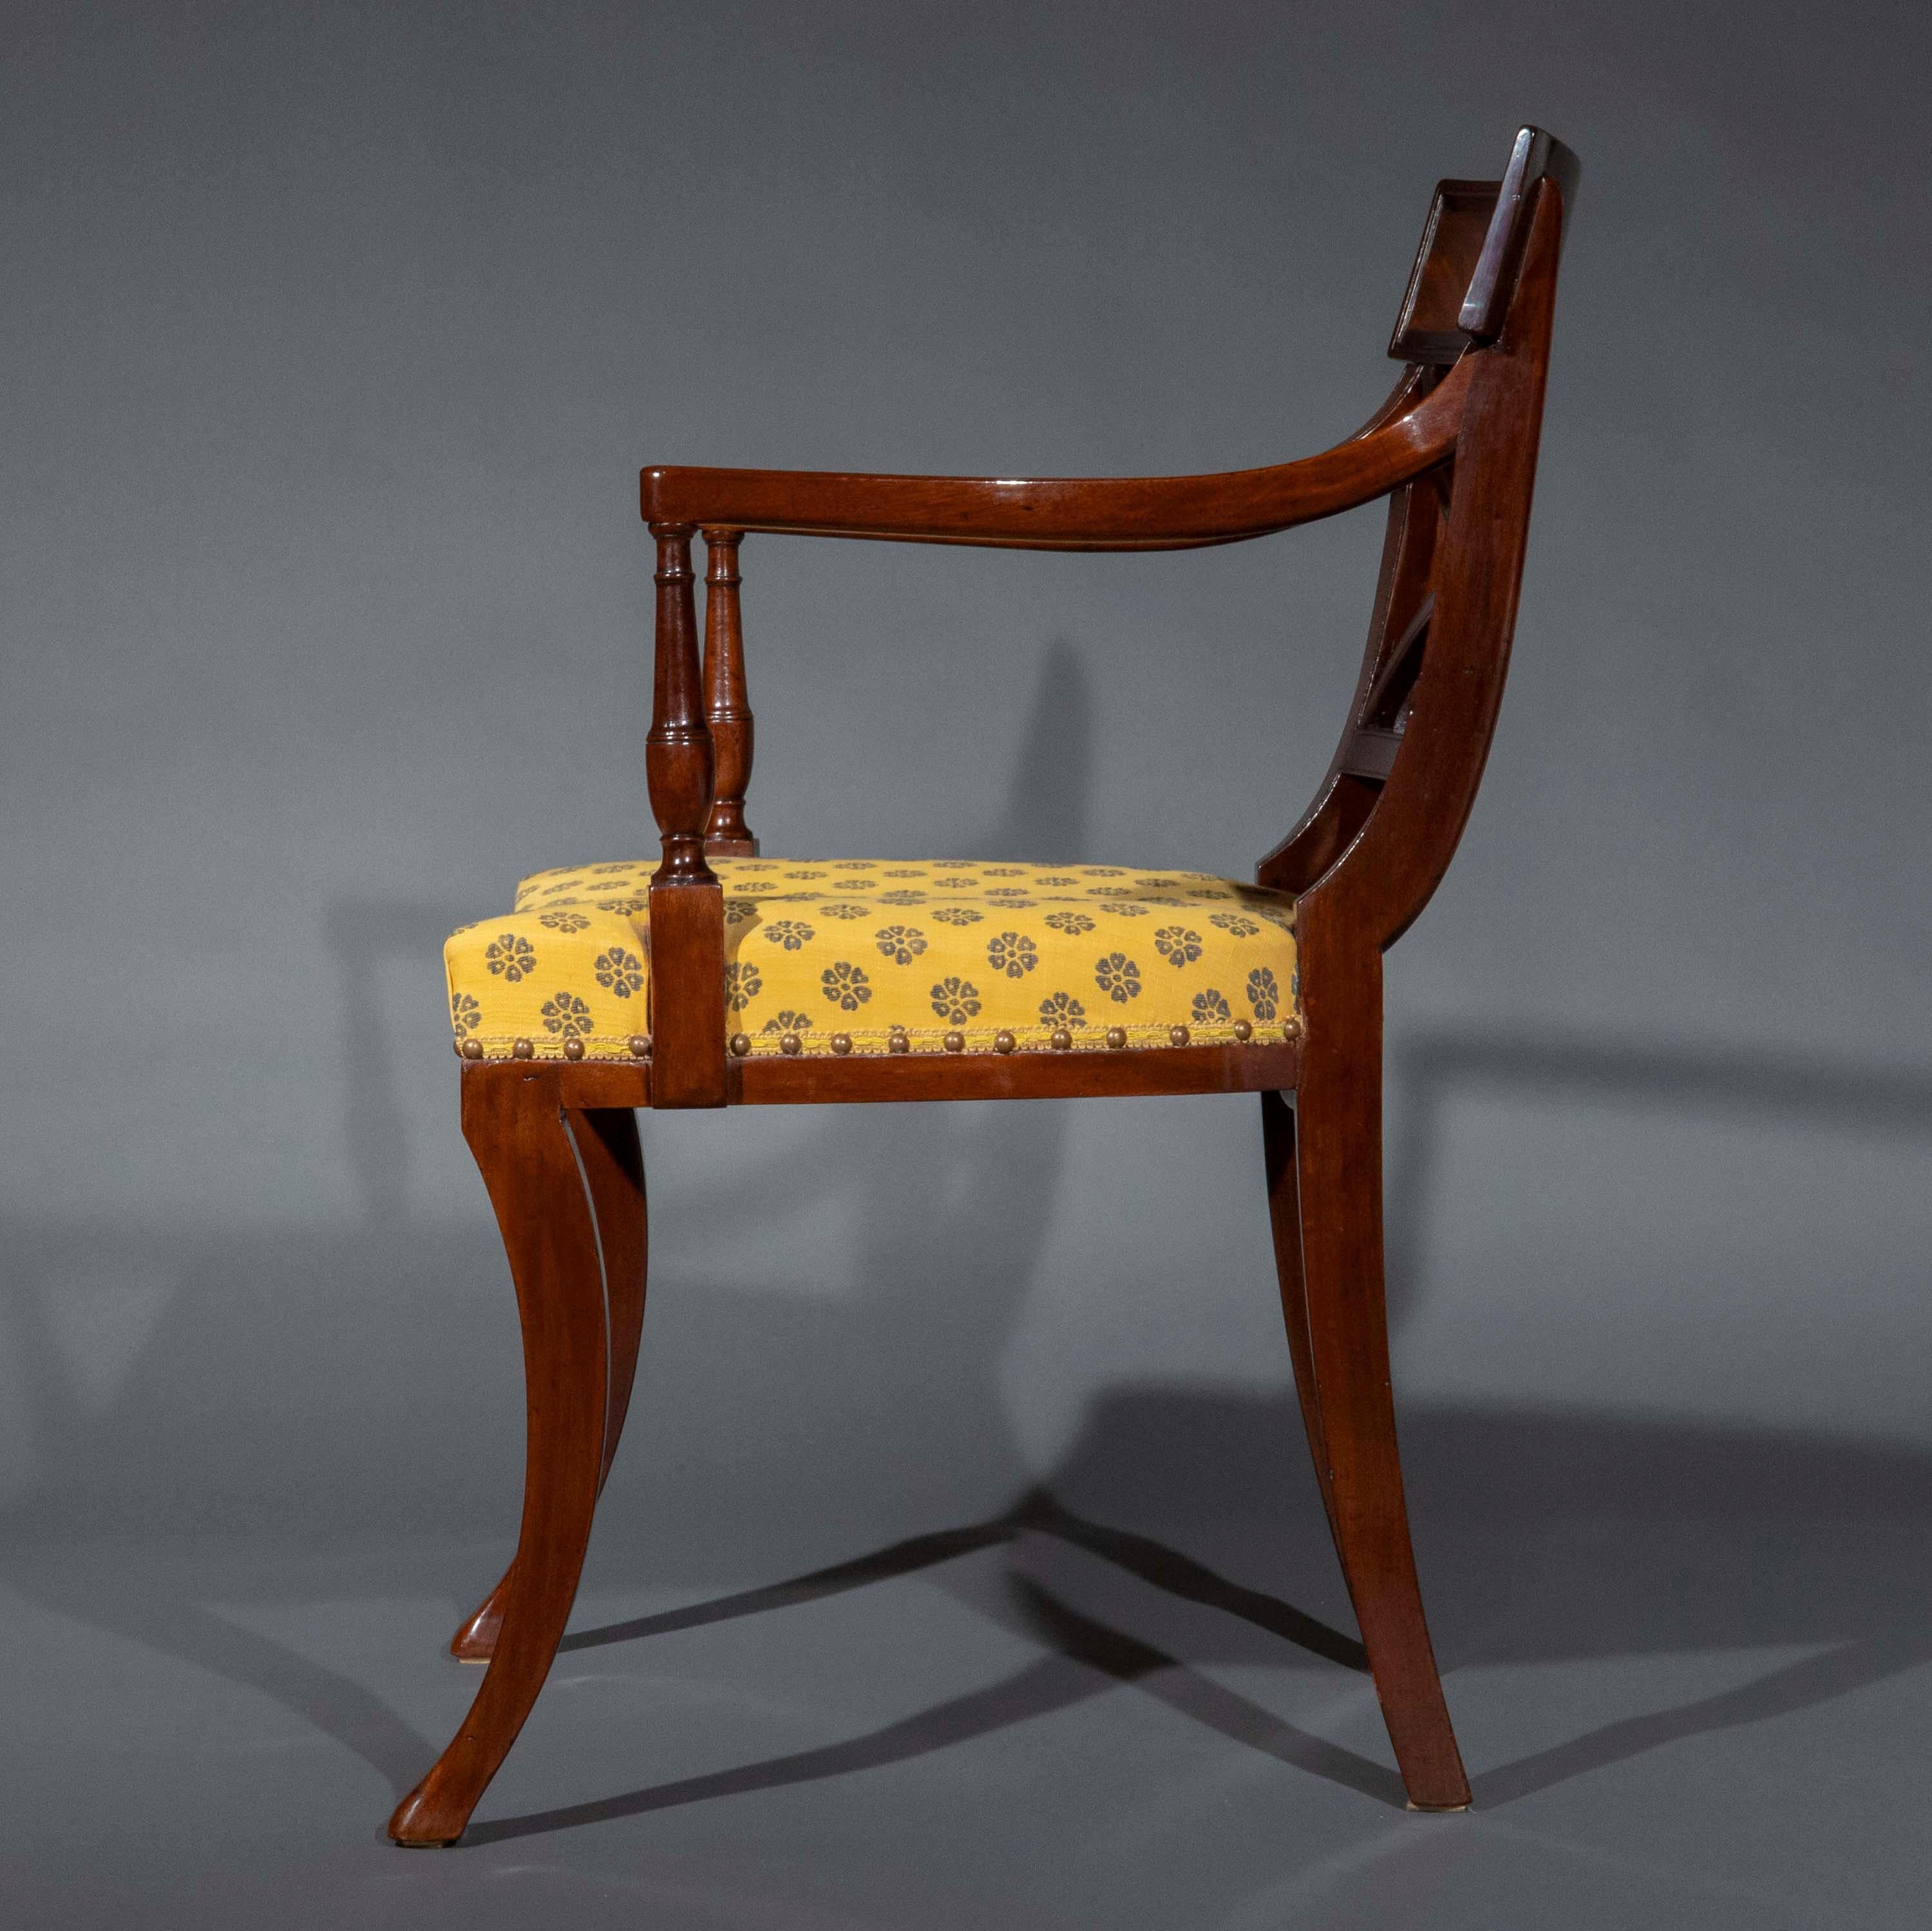 19th Century Pair of Regency Klismos Chairs, attributed to Gillows, early 19th century